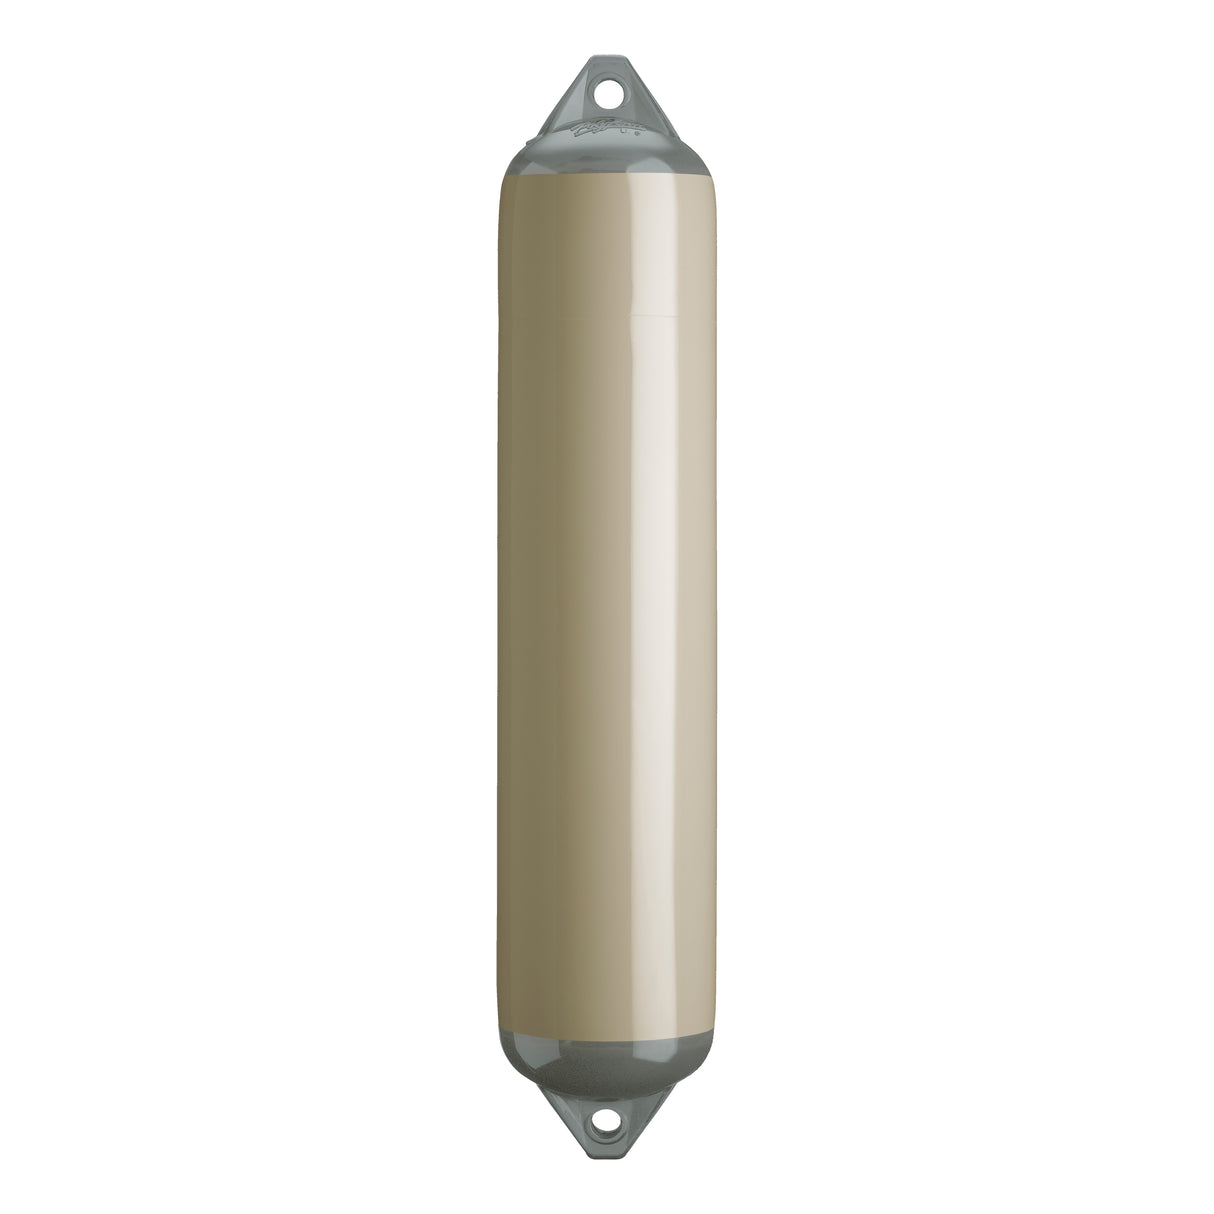 Sand boat fender with Grey-Top, Polyform F-4